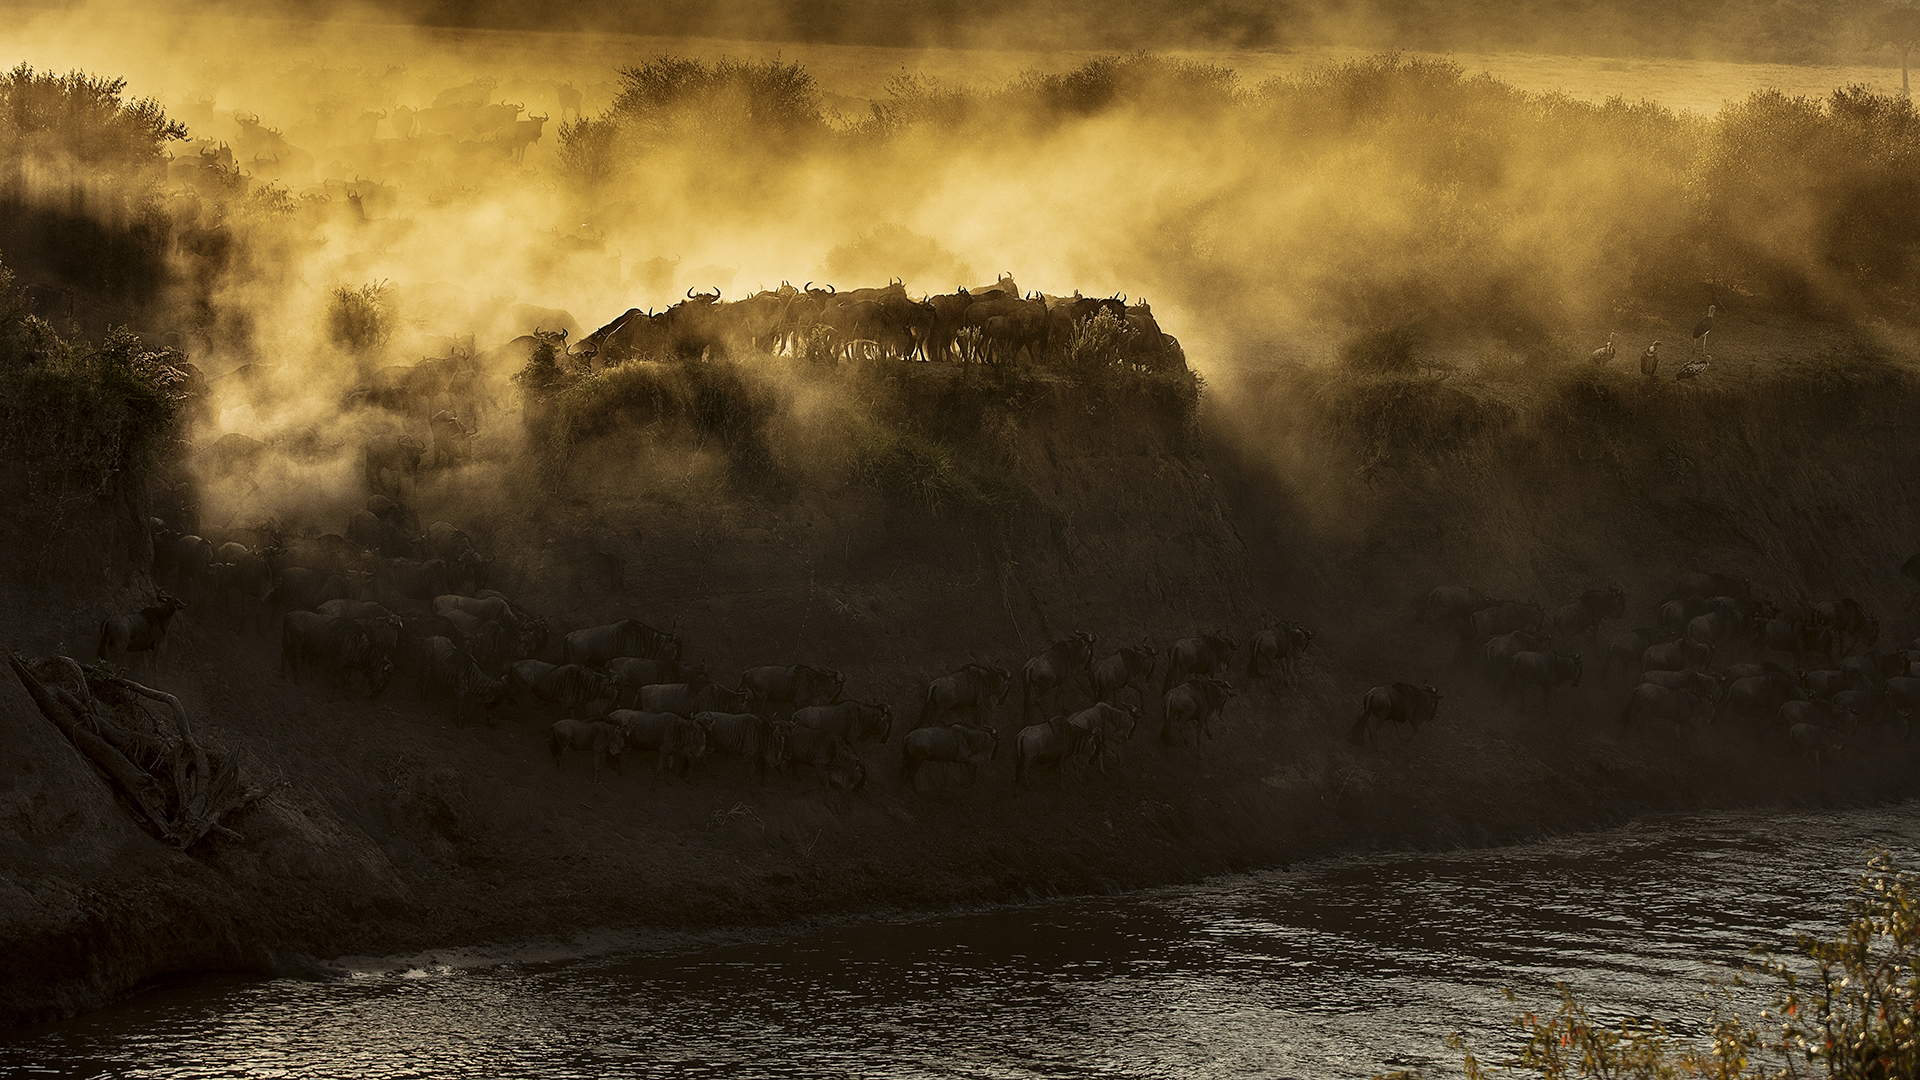 A group of wildebeest stands at the edge of water.